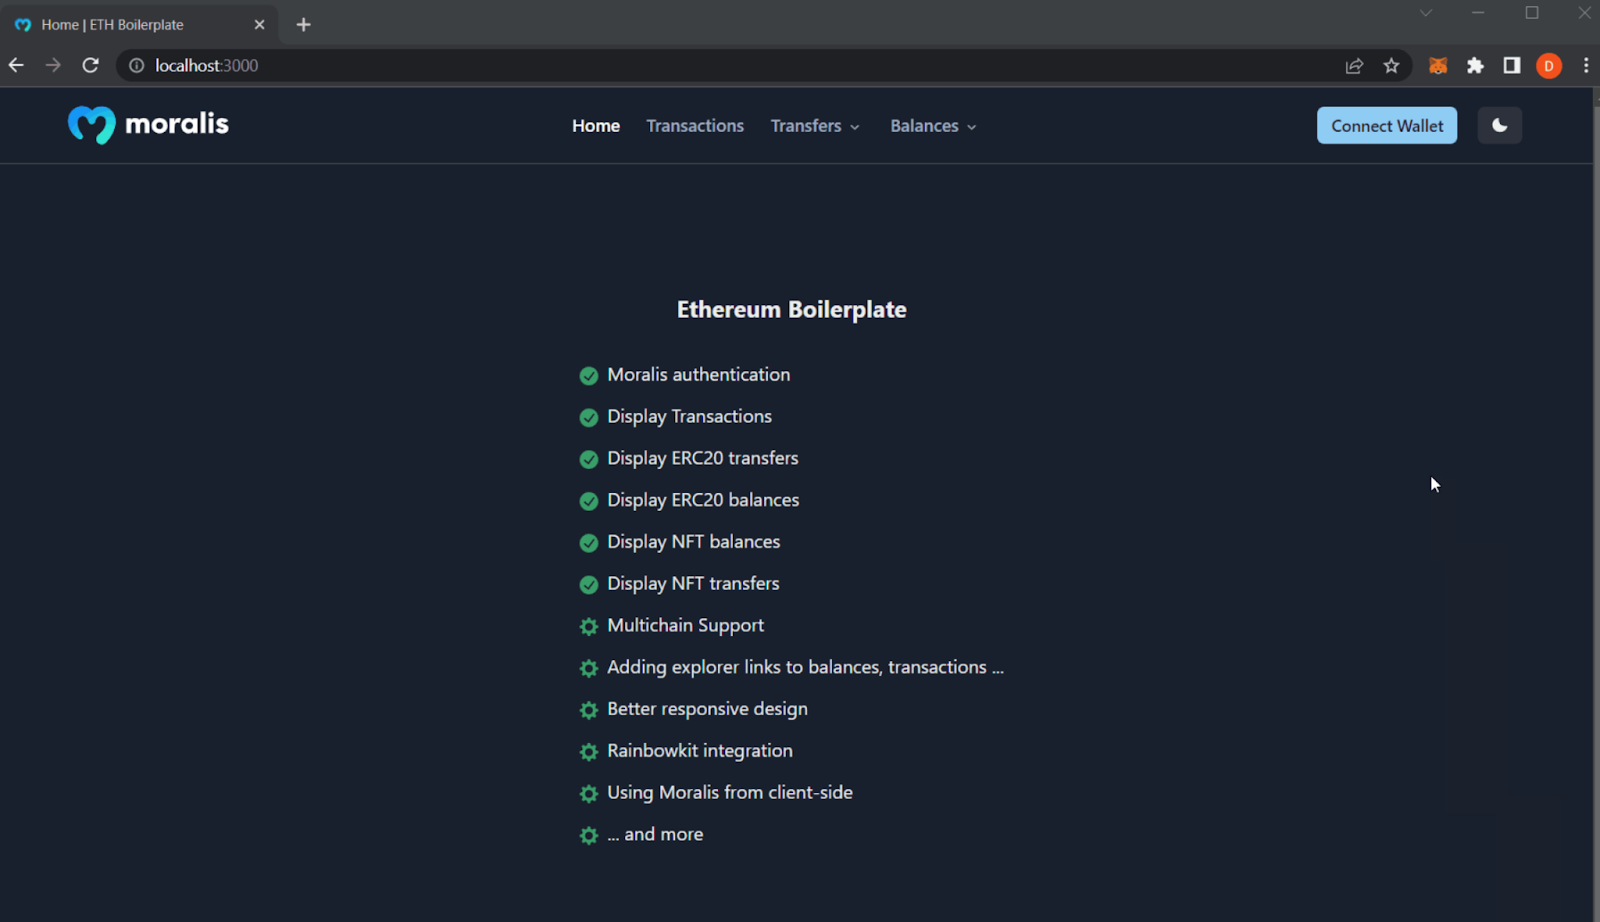 A landing page of a decentralized website showing the title, "Ethereum boilerplate".